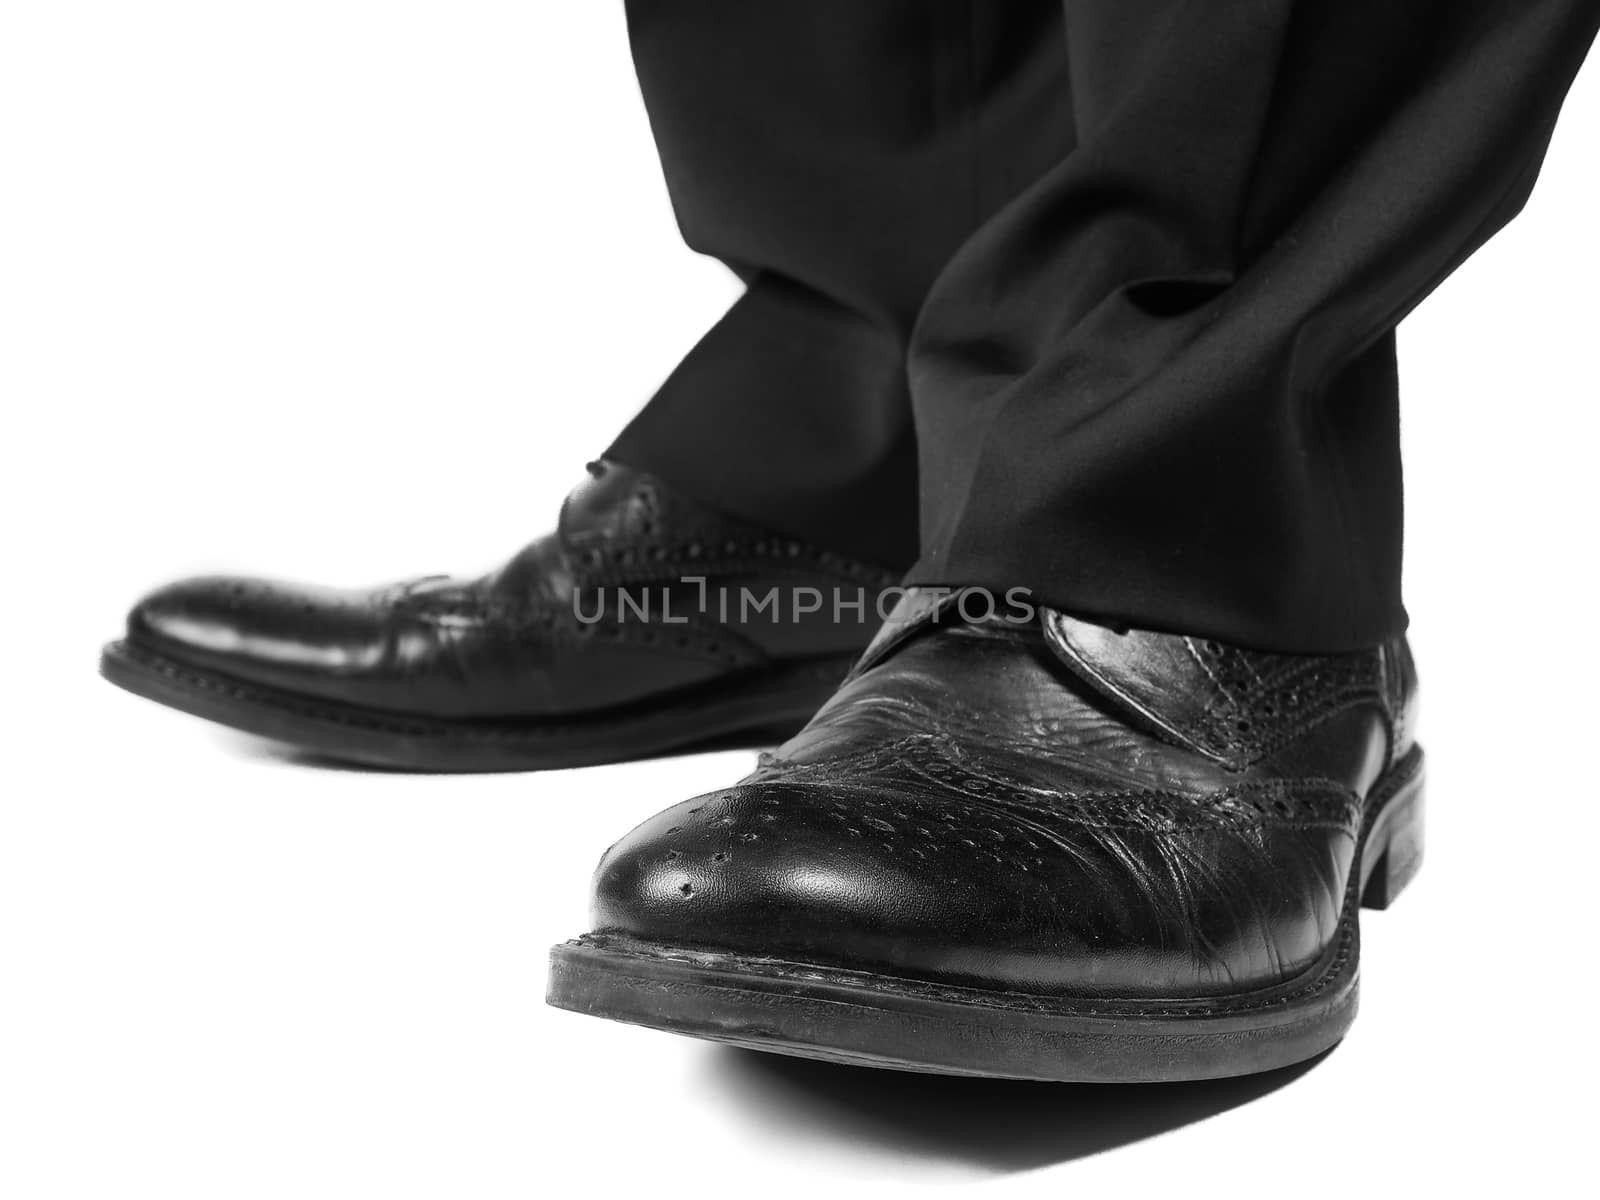 Masculine suit wearing shiny black leather shoes by Arvebettum